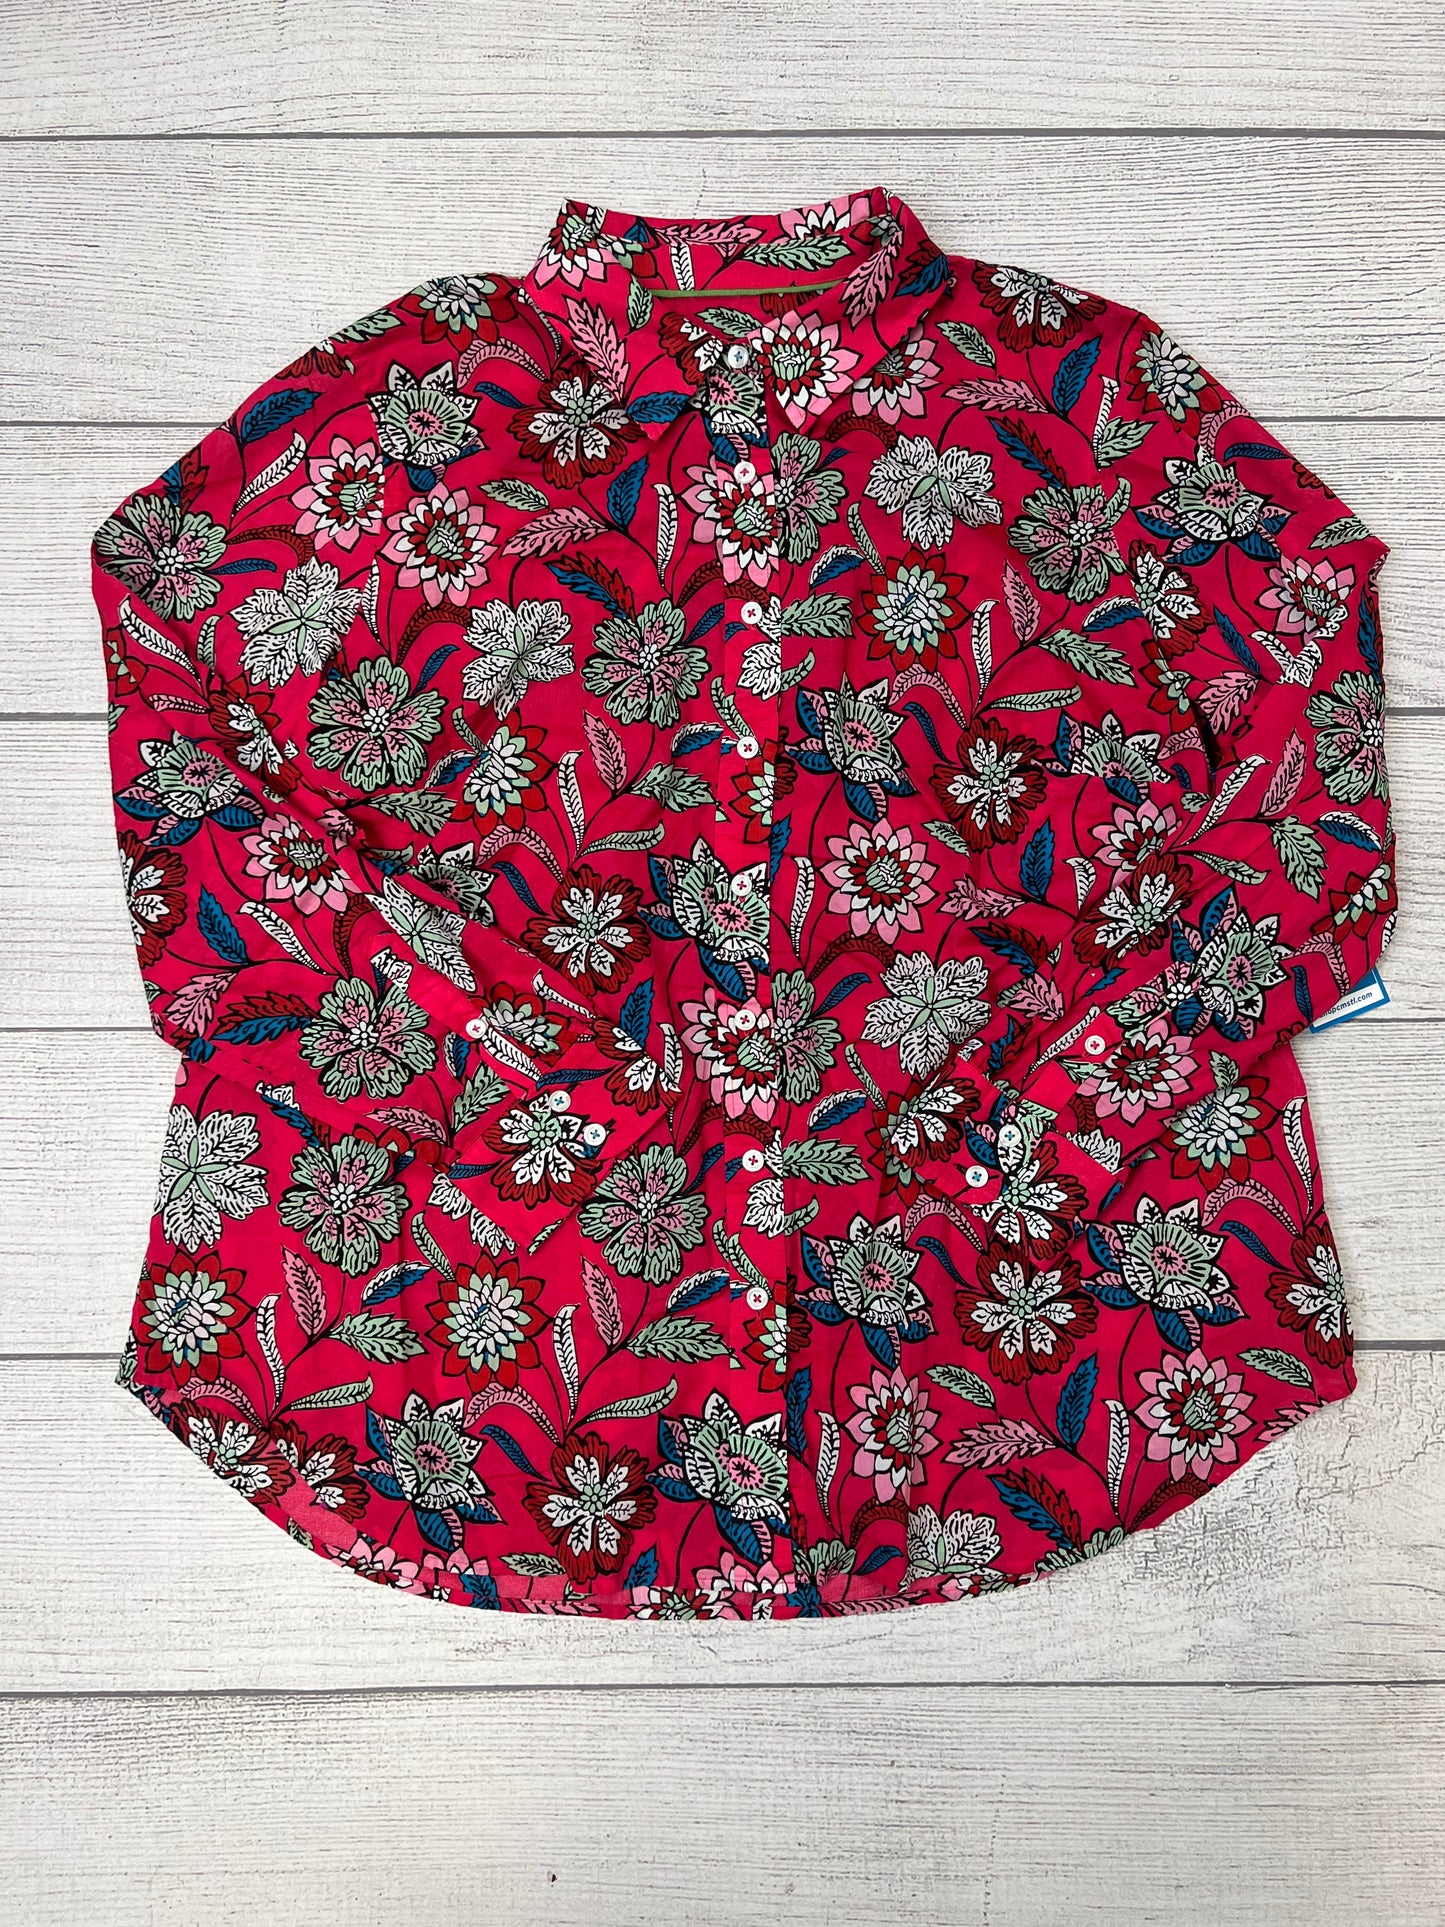 Floral Blouse Long Sleeve Talbots, Size 2x